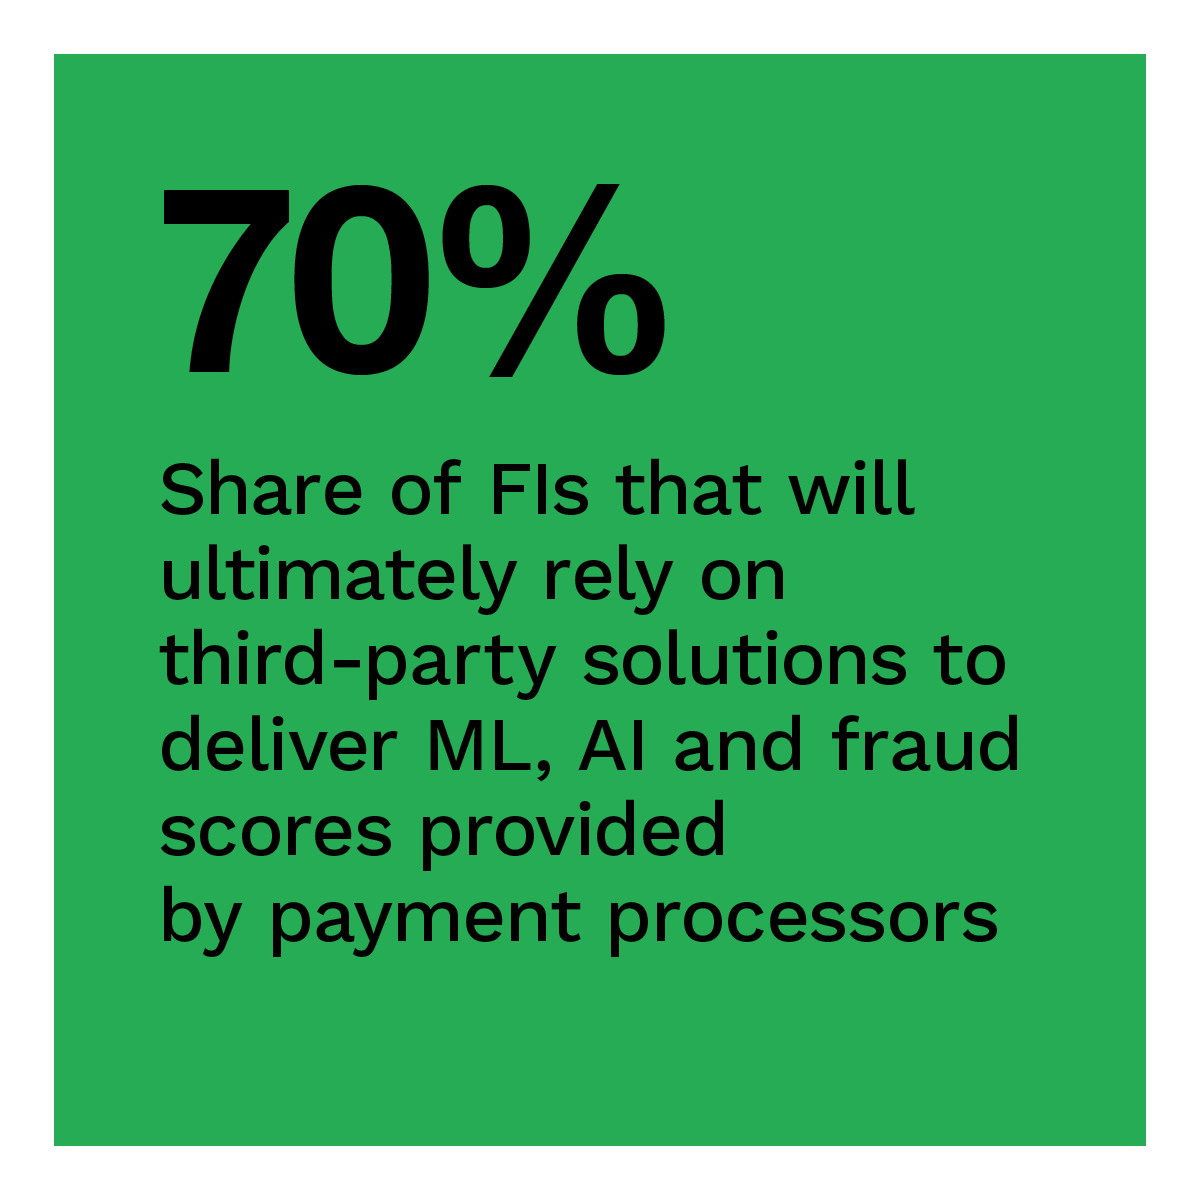 70%: Share of FIs that will ultimately rely on third-party solutions to deliver ML, AI and fraud scores provided by payment processors